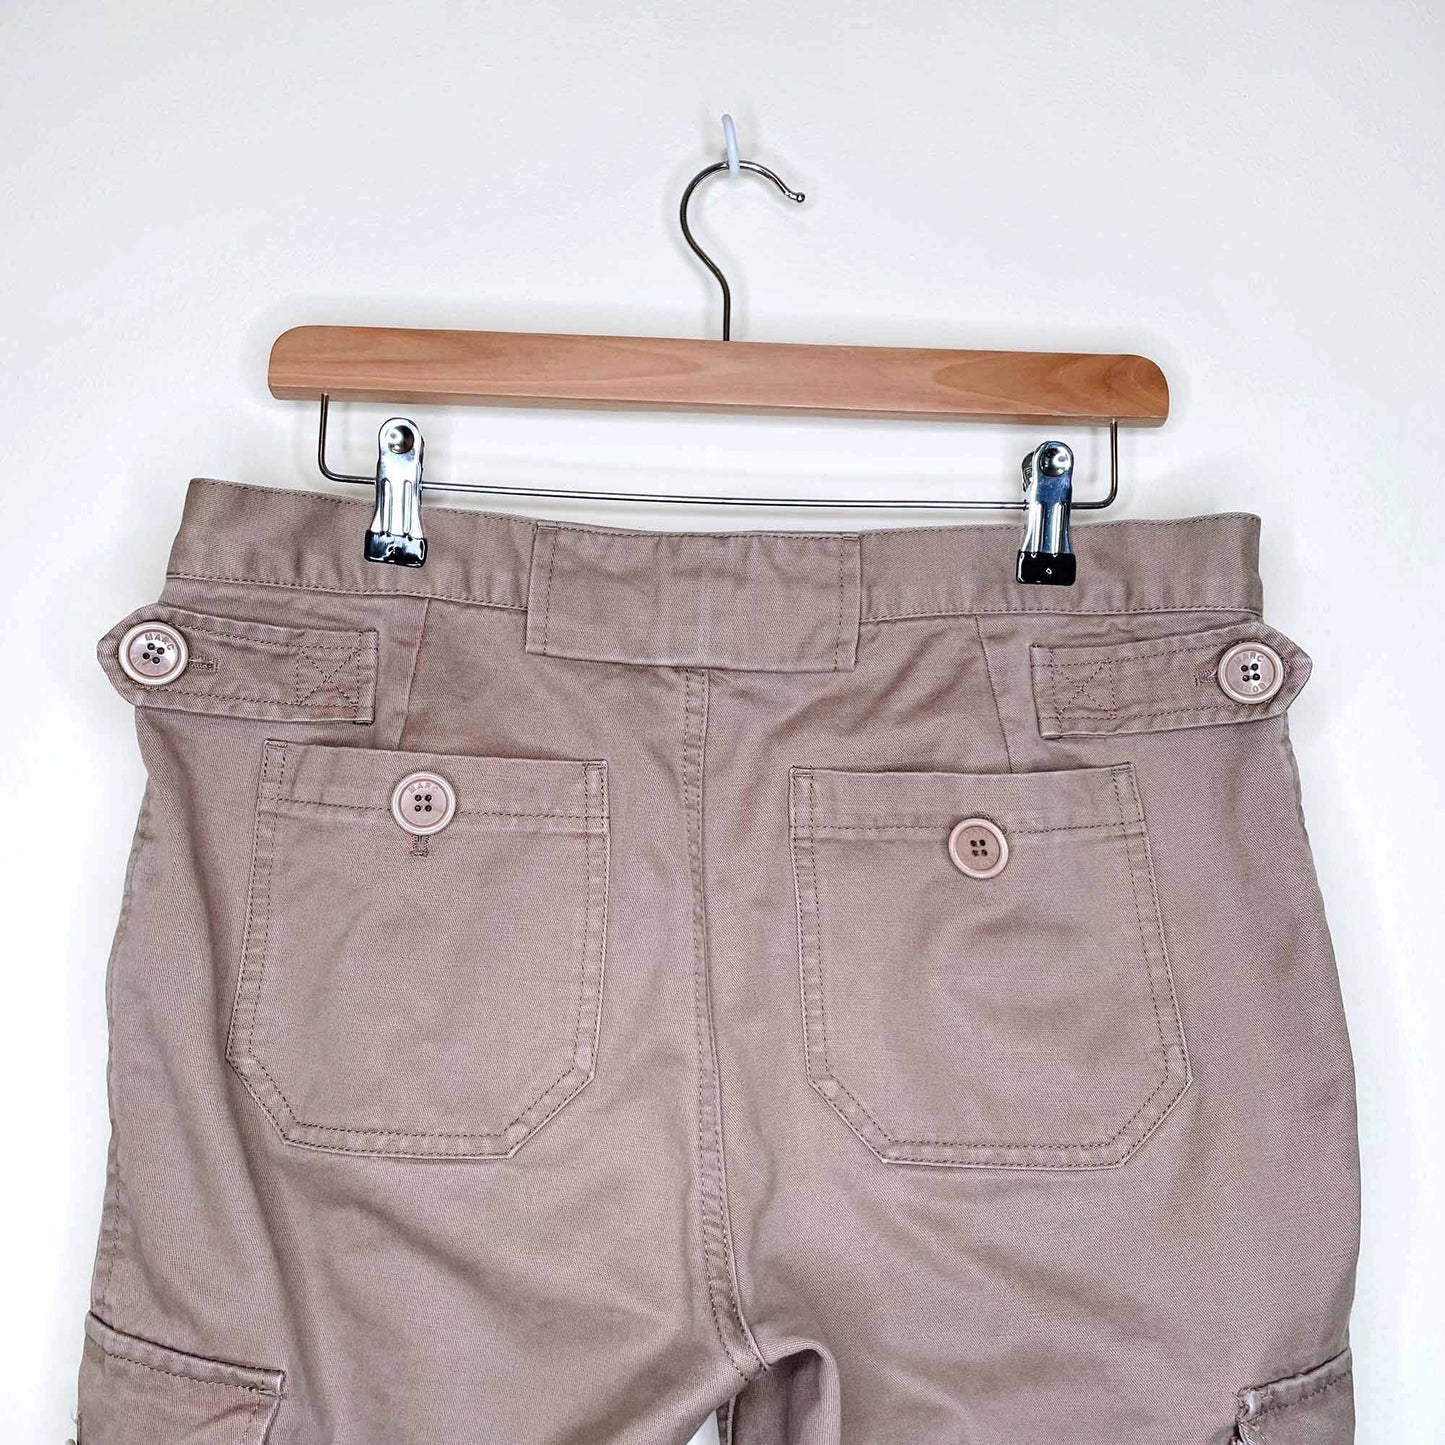 marc jacobs cropped wide leg cargo pants - size 10